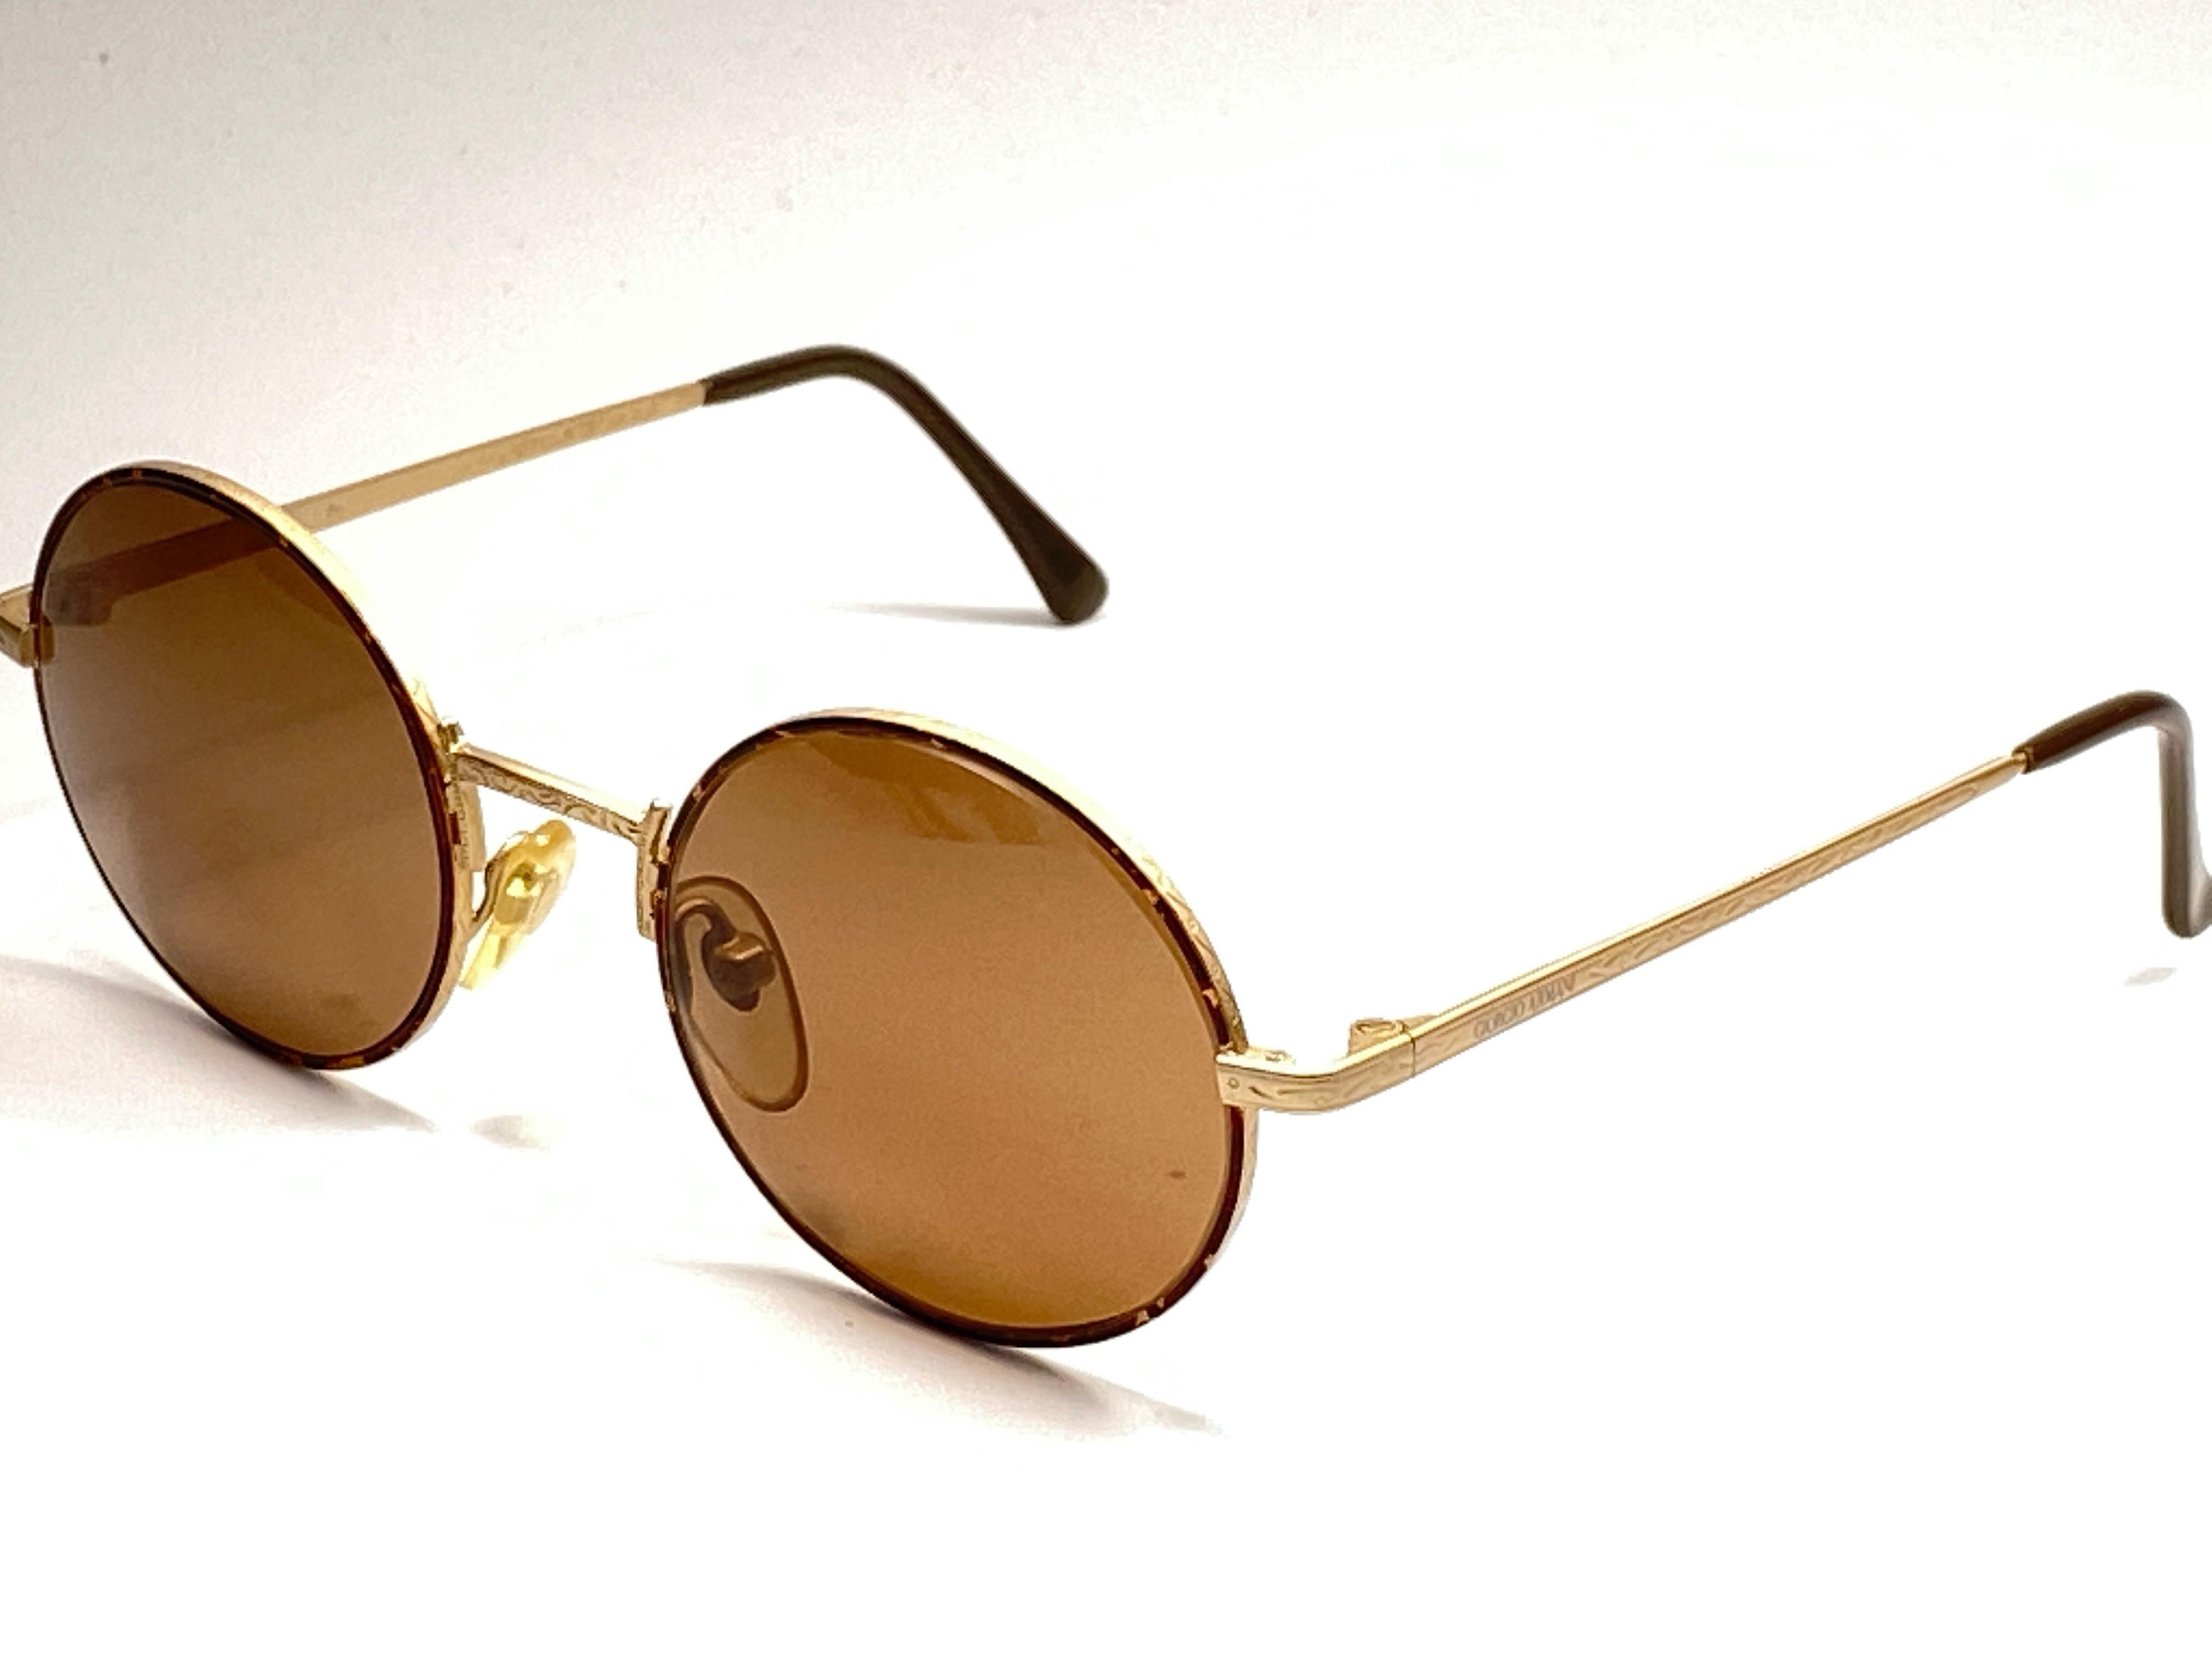 New Vintage Giorgio Armani small oval gold matte frame with G15 brown lenses.

Made in Italy.
 
Produced and design in 1990's.

New, never worn or displayed.

FRONT : 13 cms
LENS HEIGHT : 4.3 CMS
LENS WIDTH : 5 CMS
